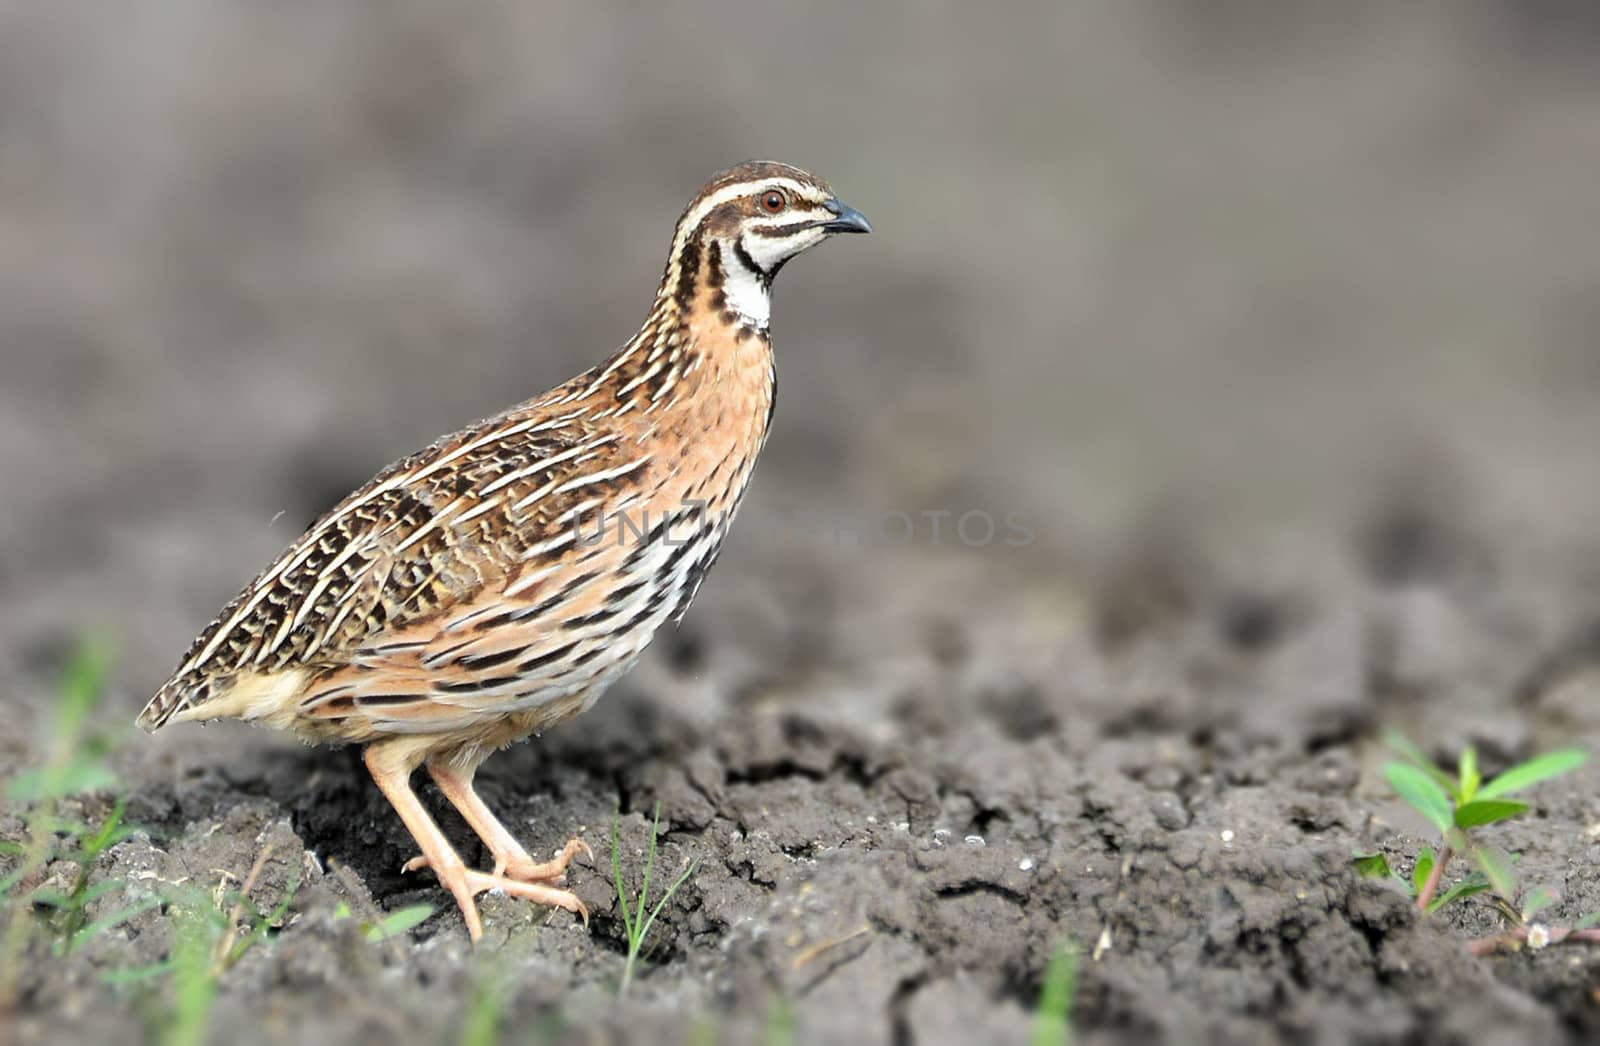 The rain quail or black-breasted quail is a species of quail found in the Indian subcontinent.